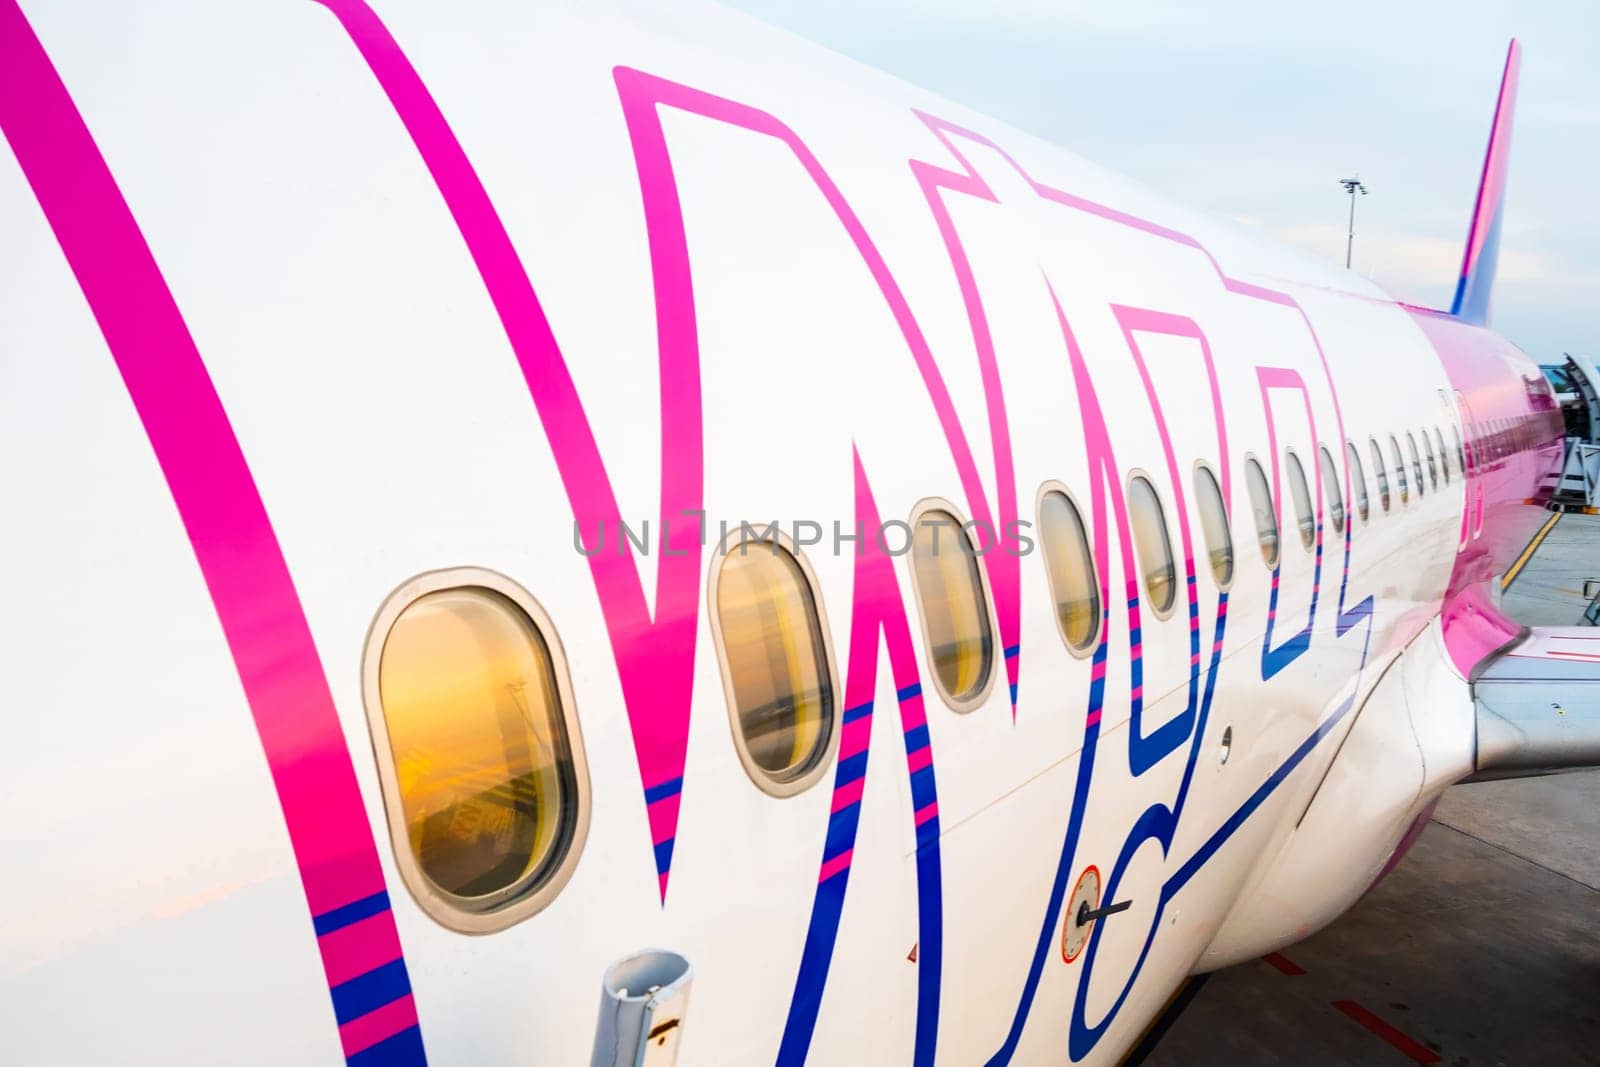 Wizzair airline aircraft in airport by vladimka